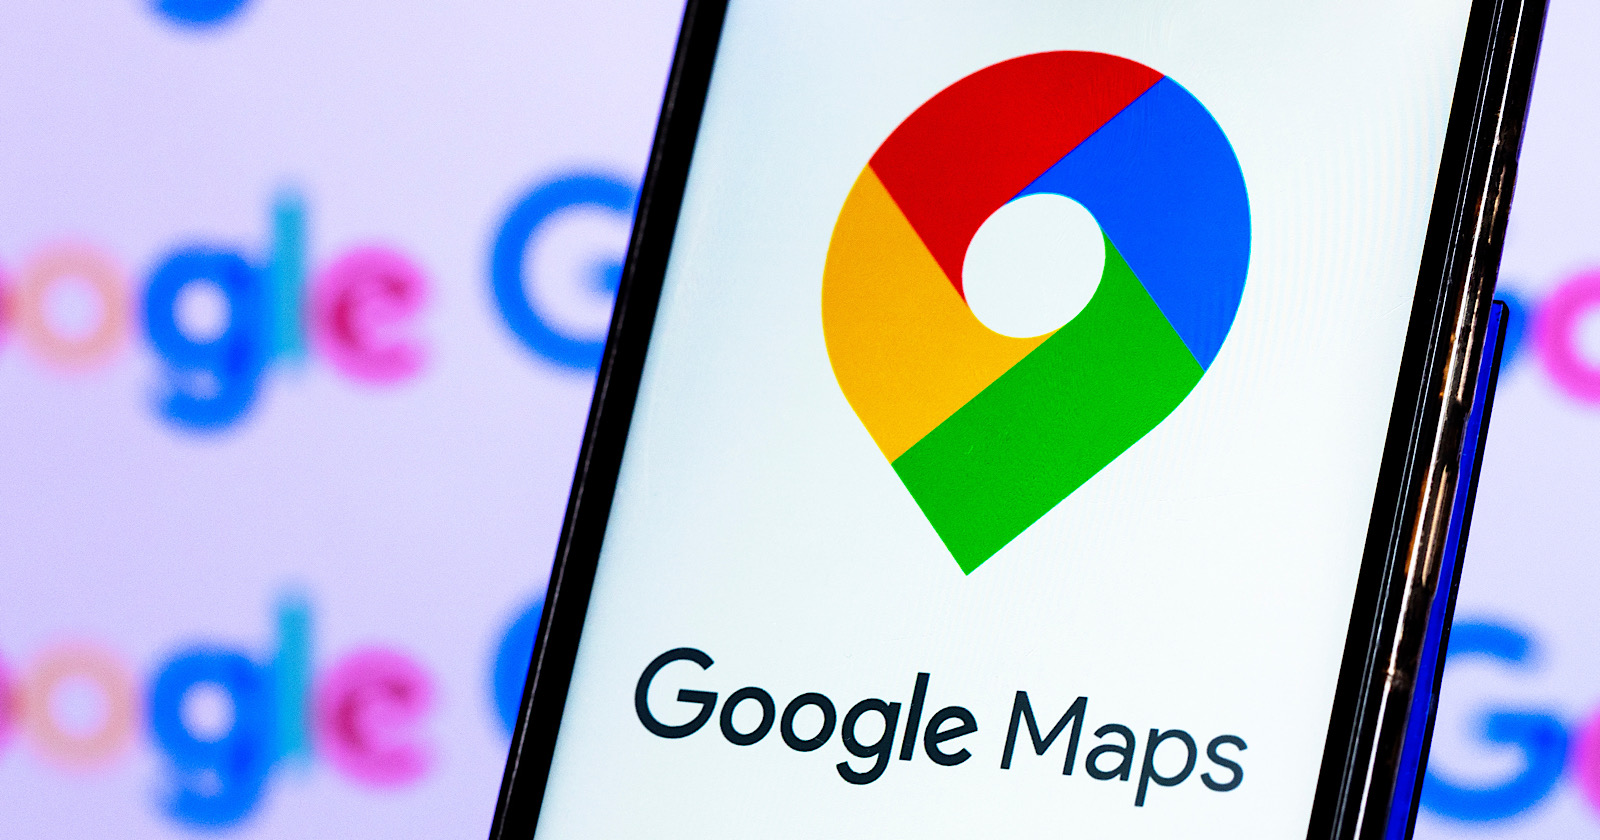 google maps search trends for january 2021 via mattgsouthern